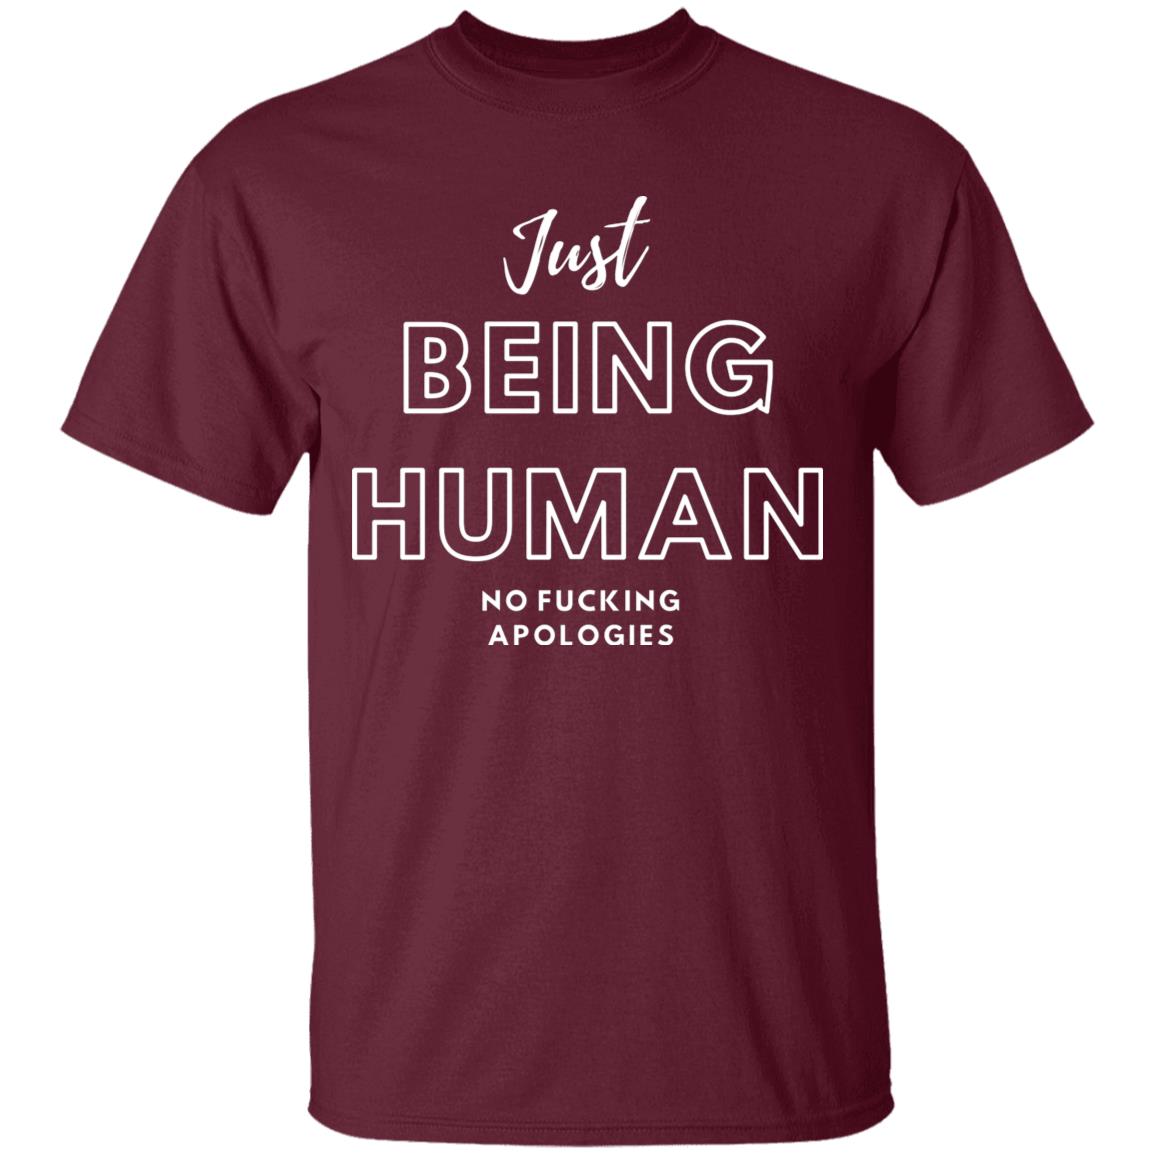 Just being Human T-Shirt